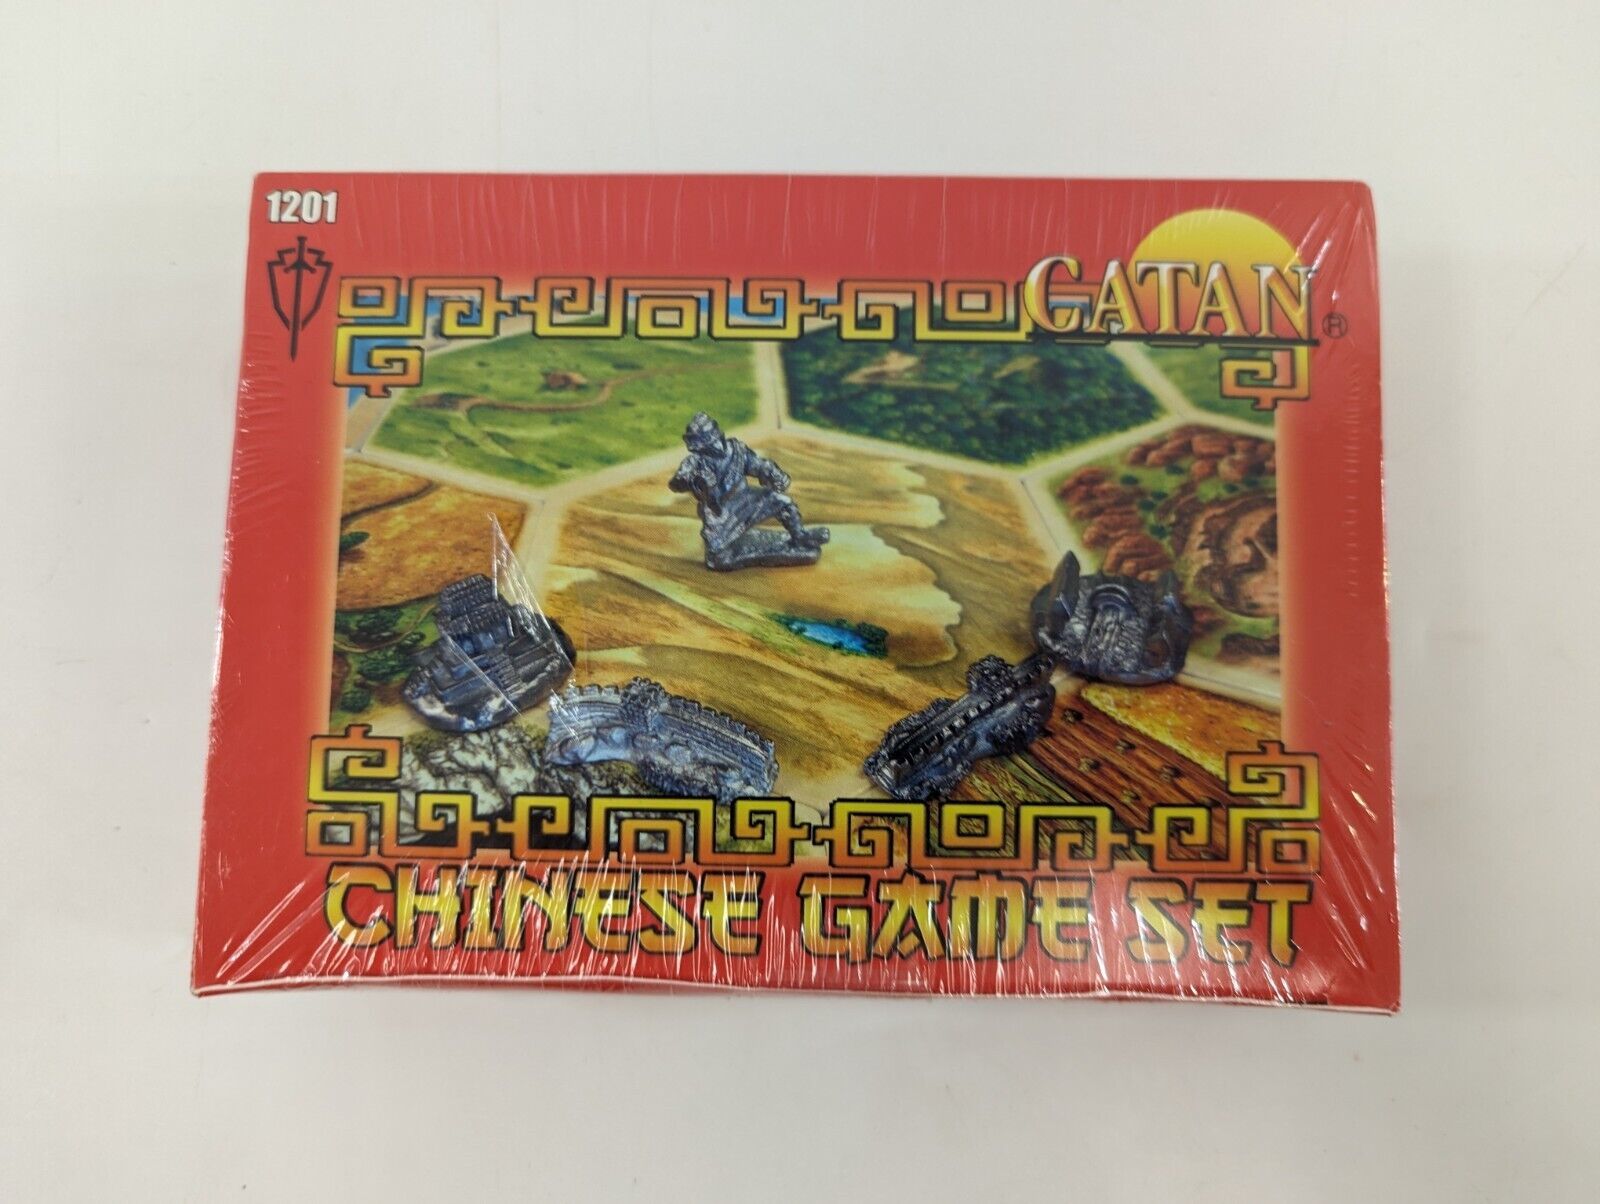 My Catan Accessories Chinese Game Set 1201 Sealed 2011 Settlers of Catan - $24.18